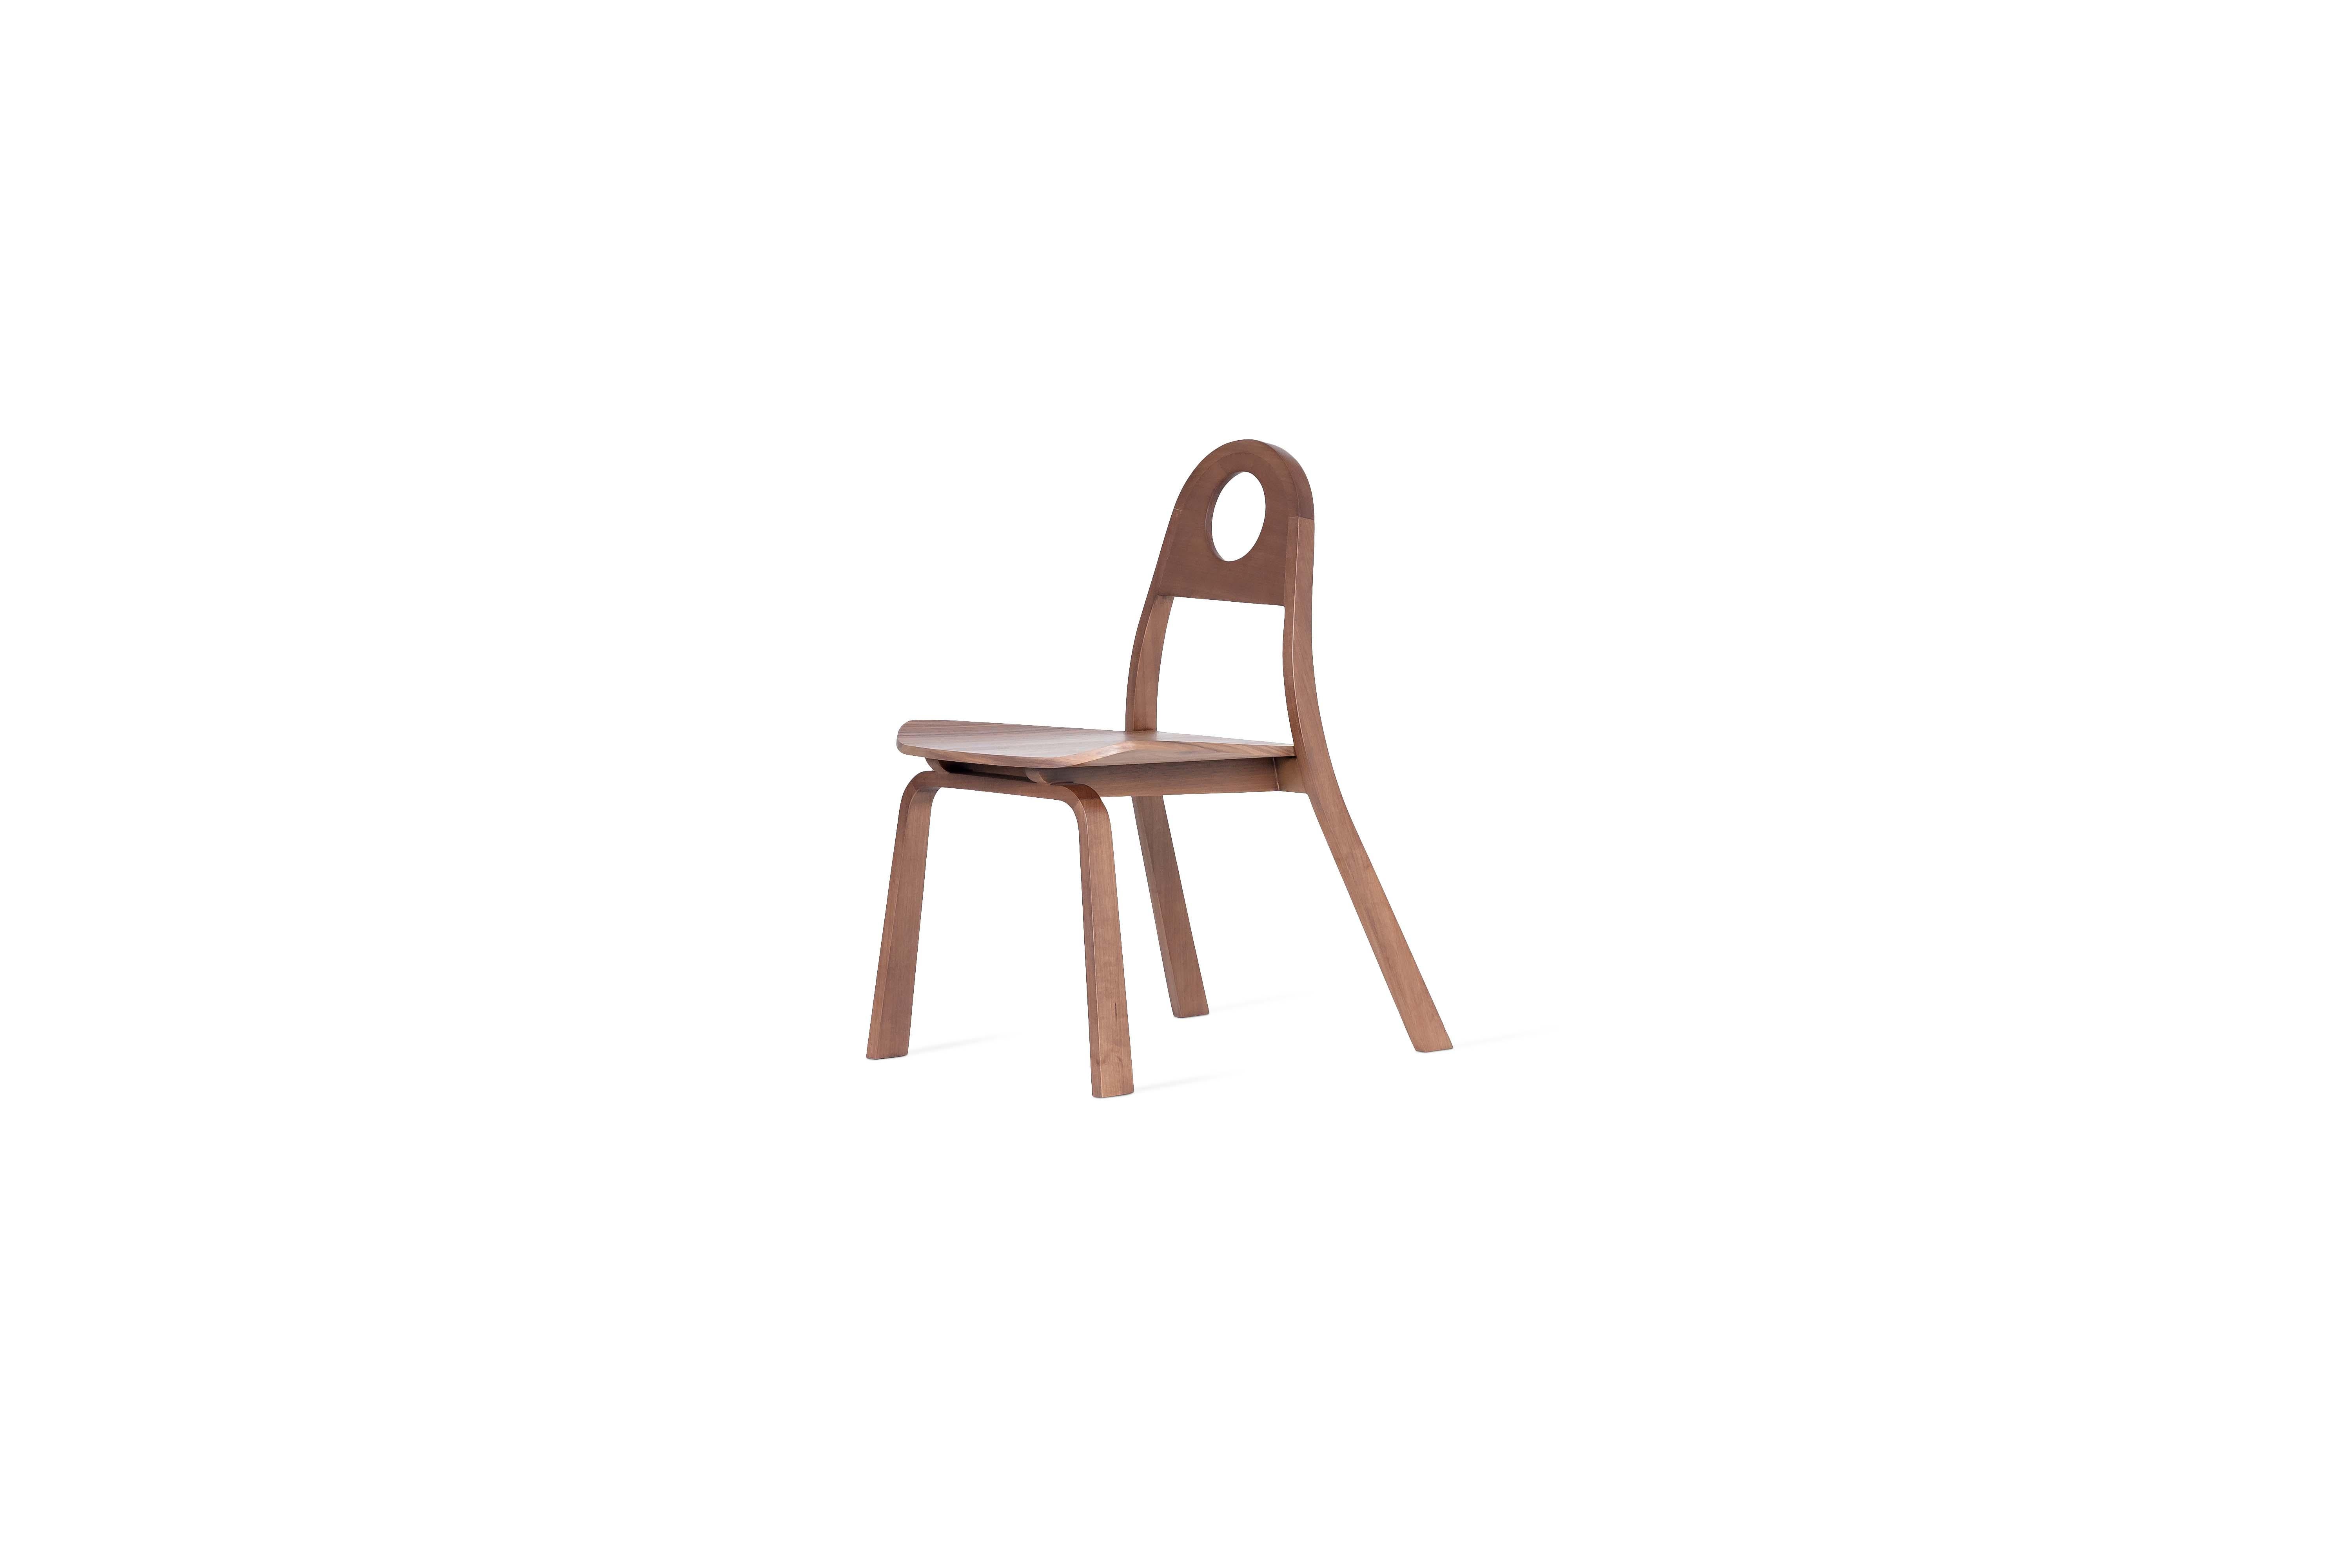 Fuji is a solid wood chair, with a sophisticated manufacturing and assembly system, capable of bending the wood to its maximum limit. Recently launched, its unique design has already won an award in Europe, and is currently manufactured in different